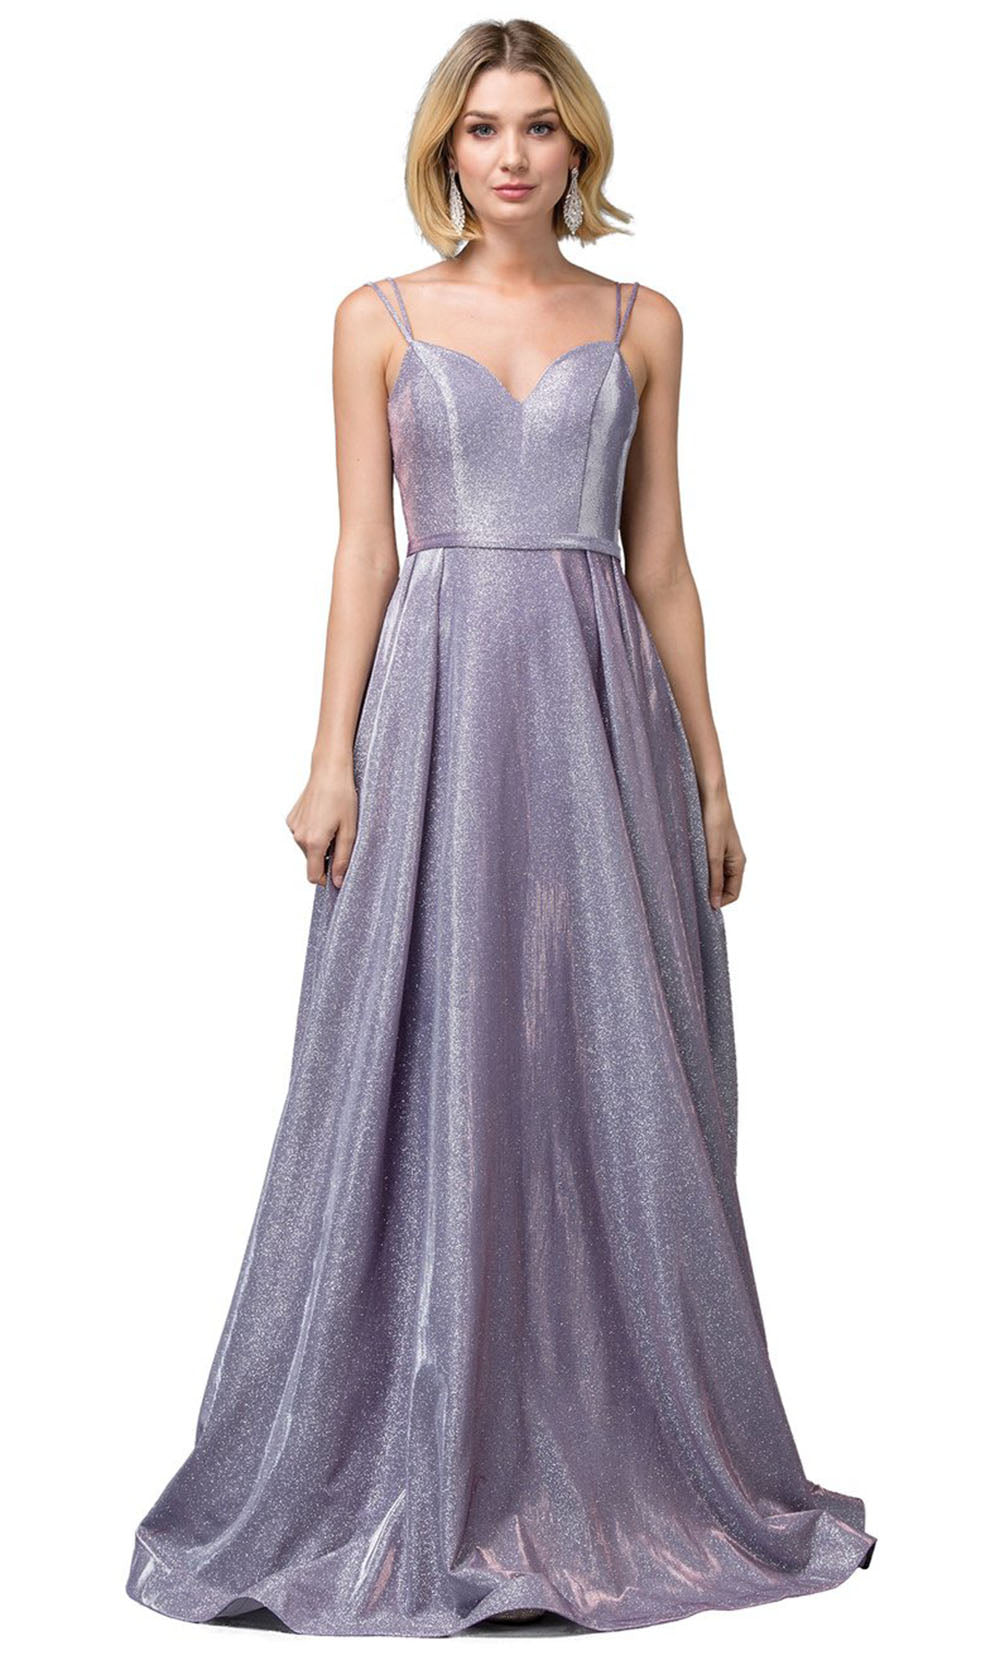 Dancing Queen - 2720 Sleeveless V-Neck Shimmer A-Line Gown In Purple